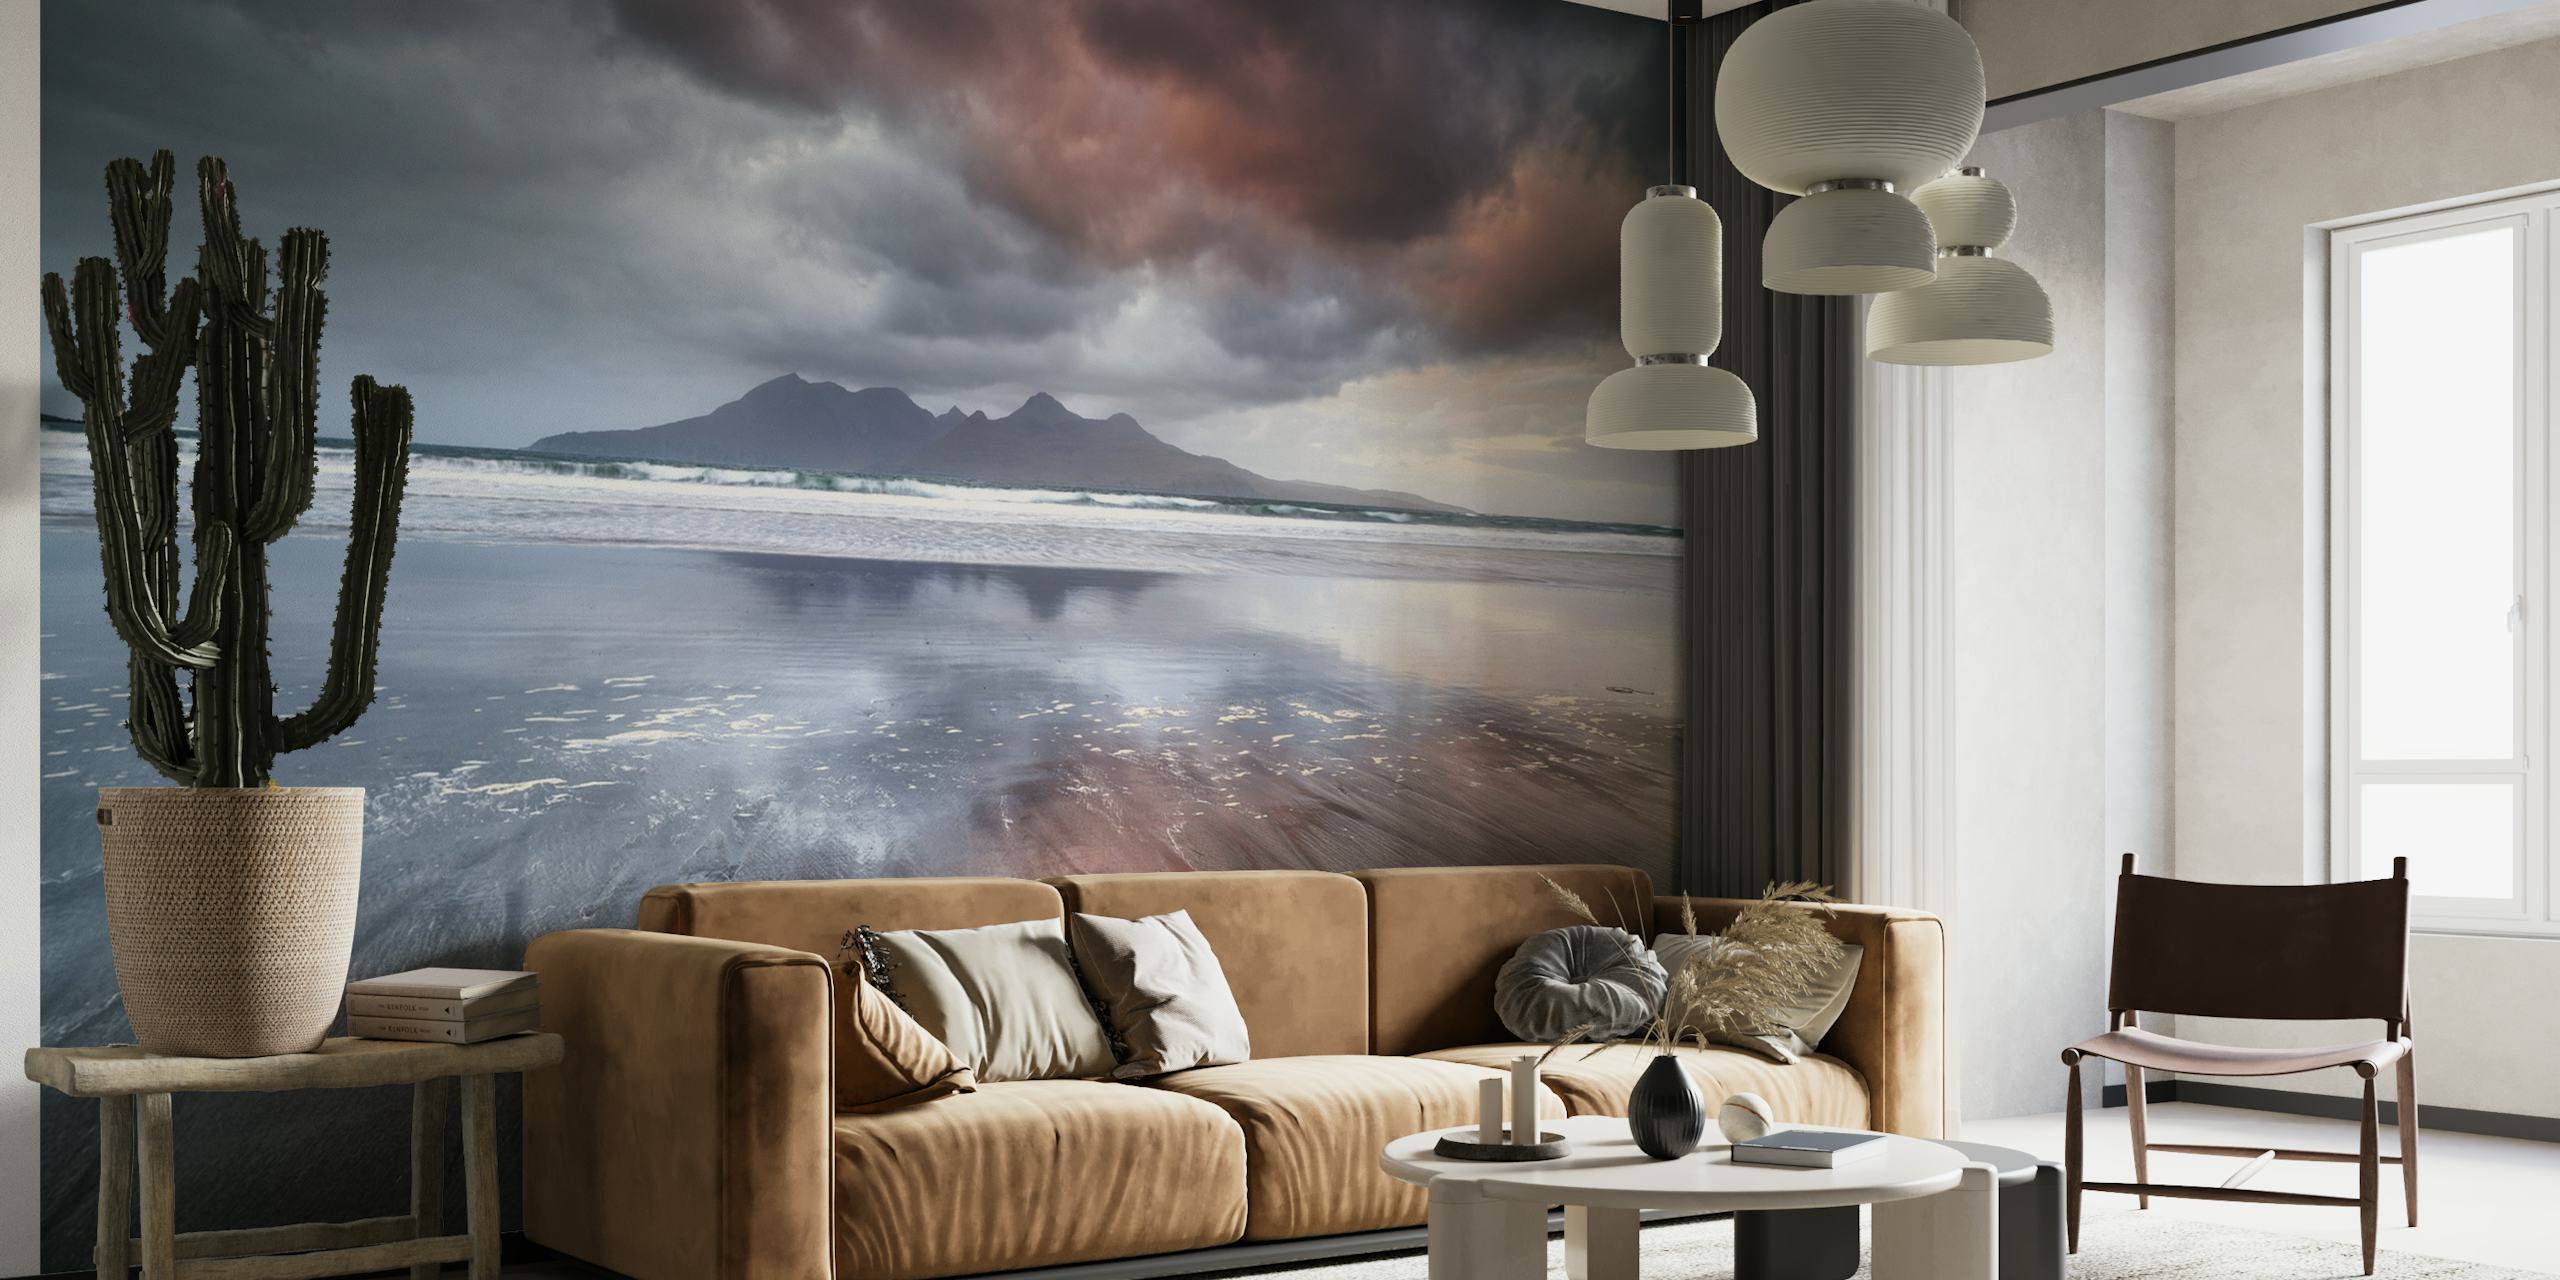 Laig Beach wall mural with dramatic clouds and tranquil seashore